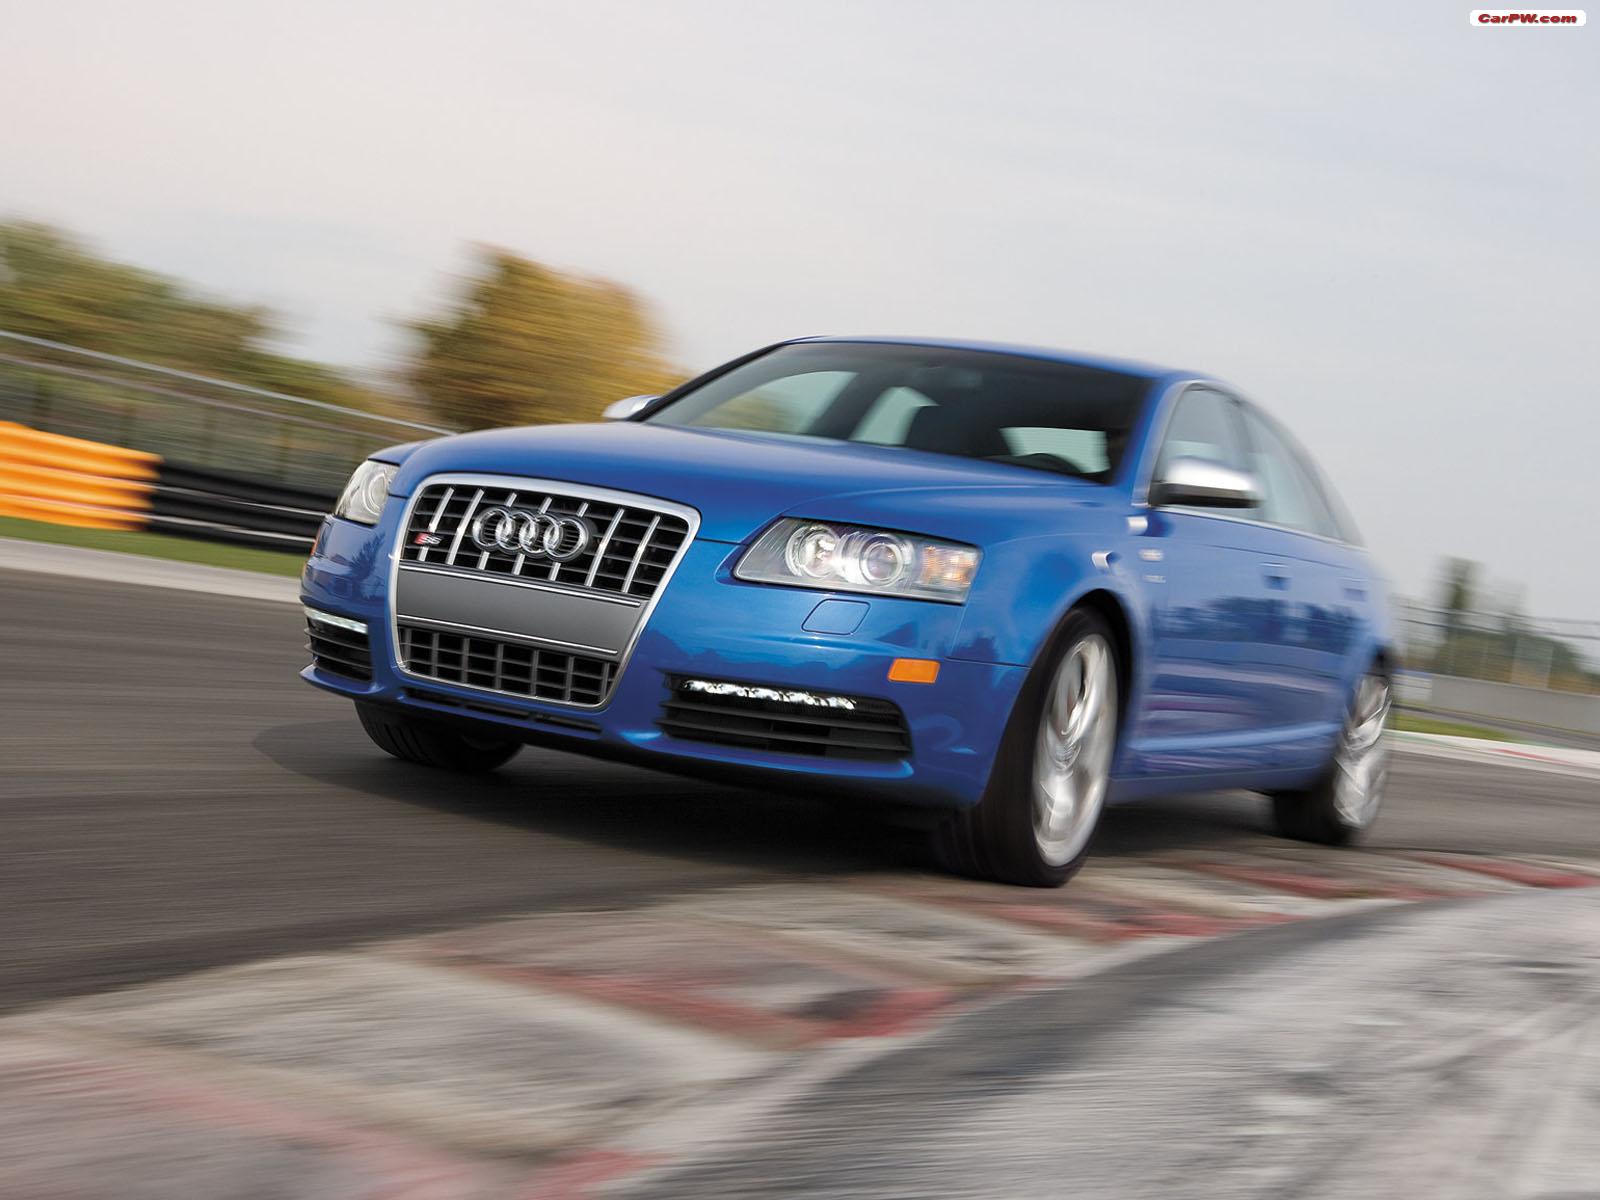 Audi S6 HD Car Wallpaper High Definition Pictures